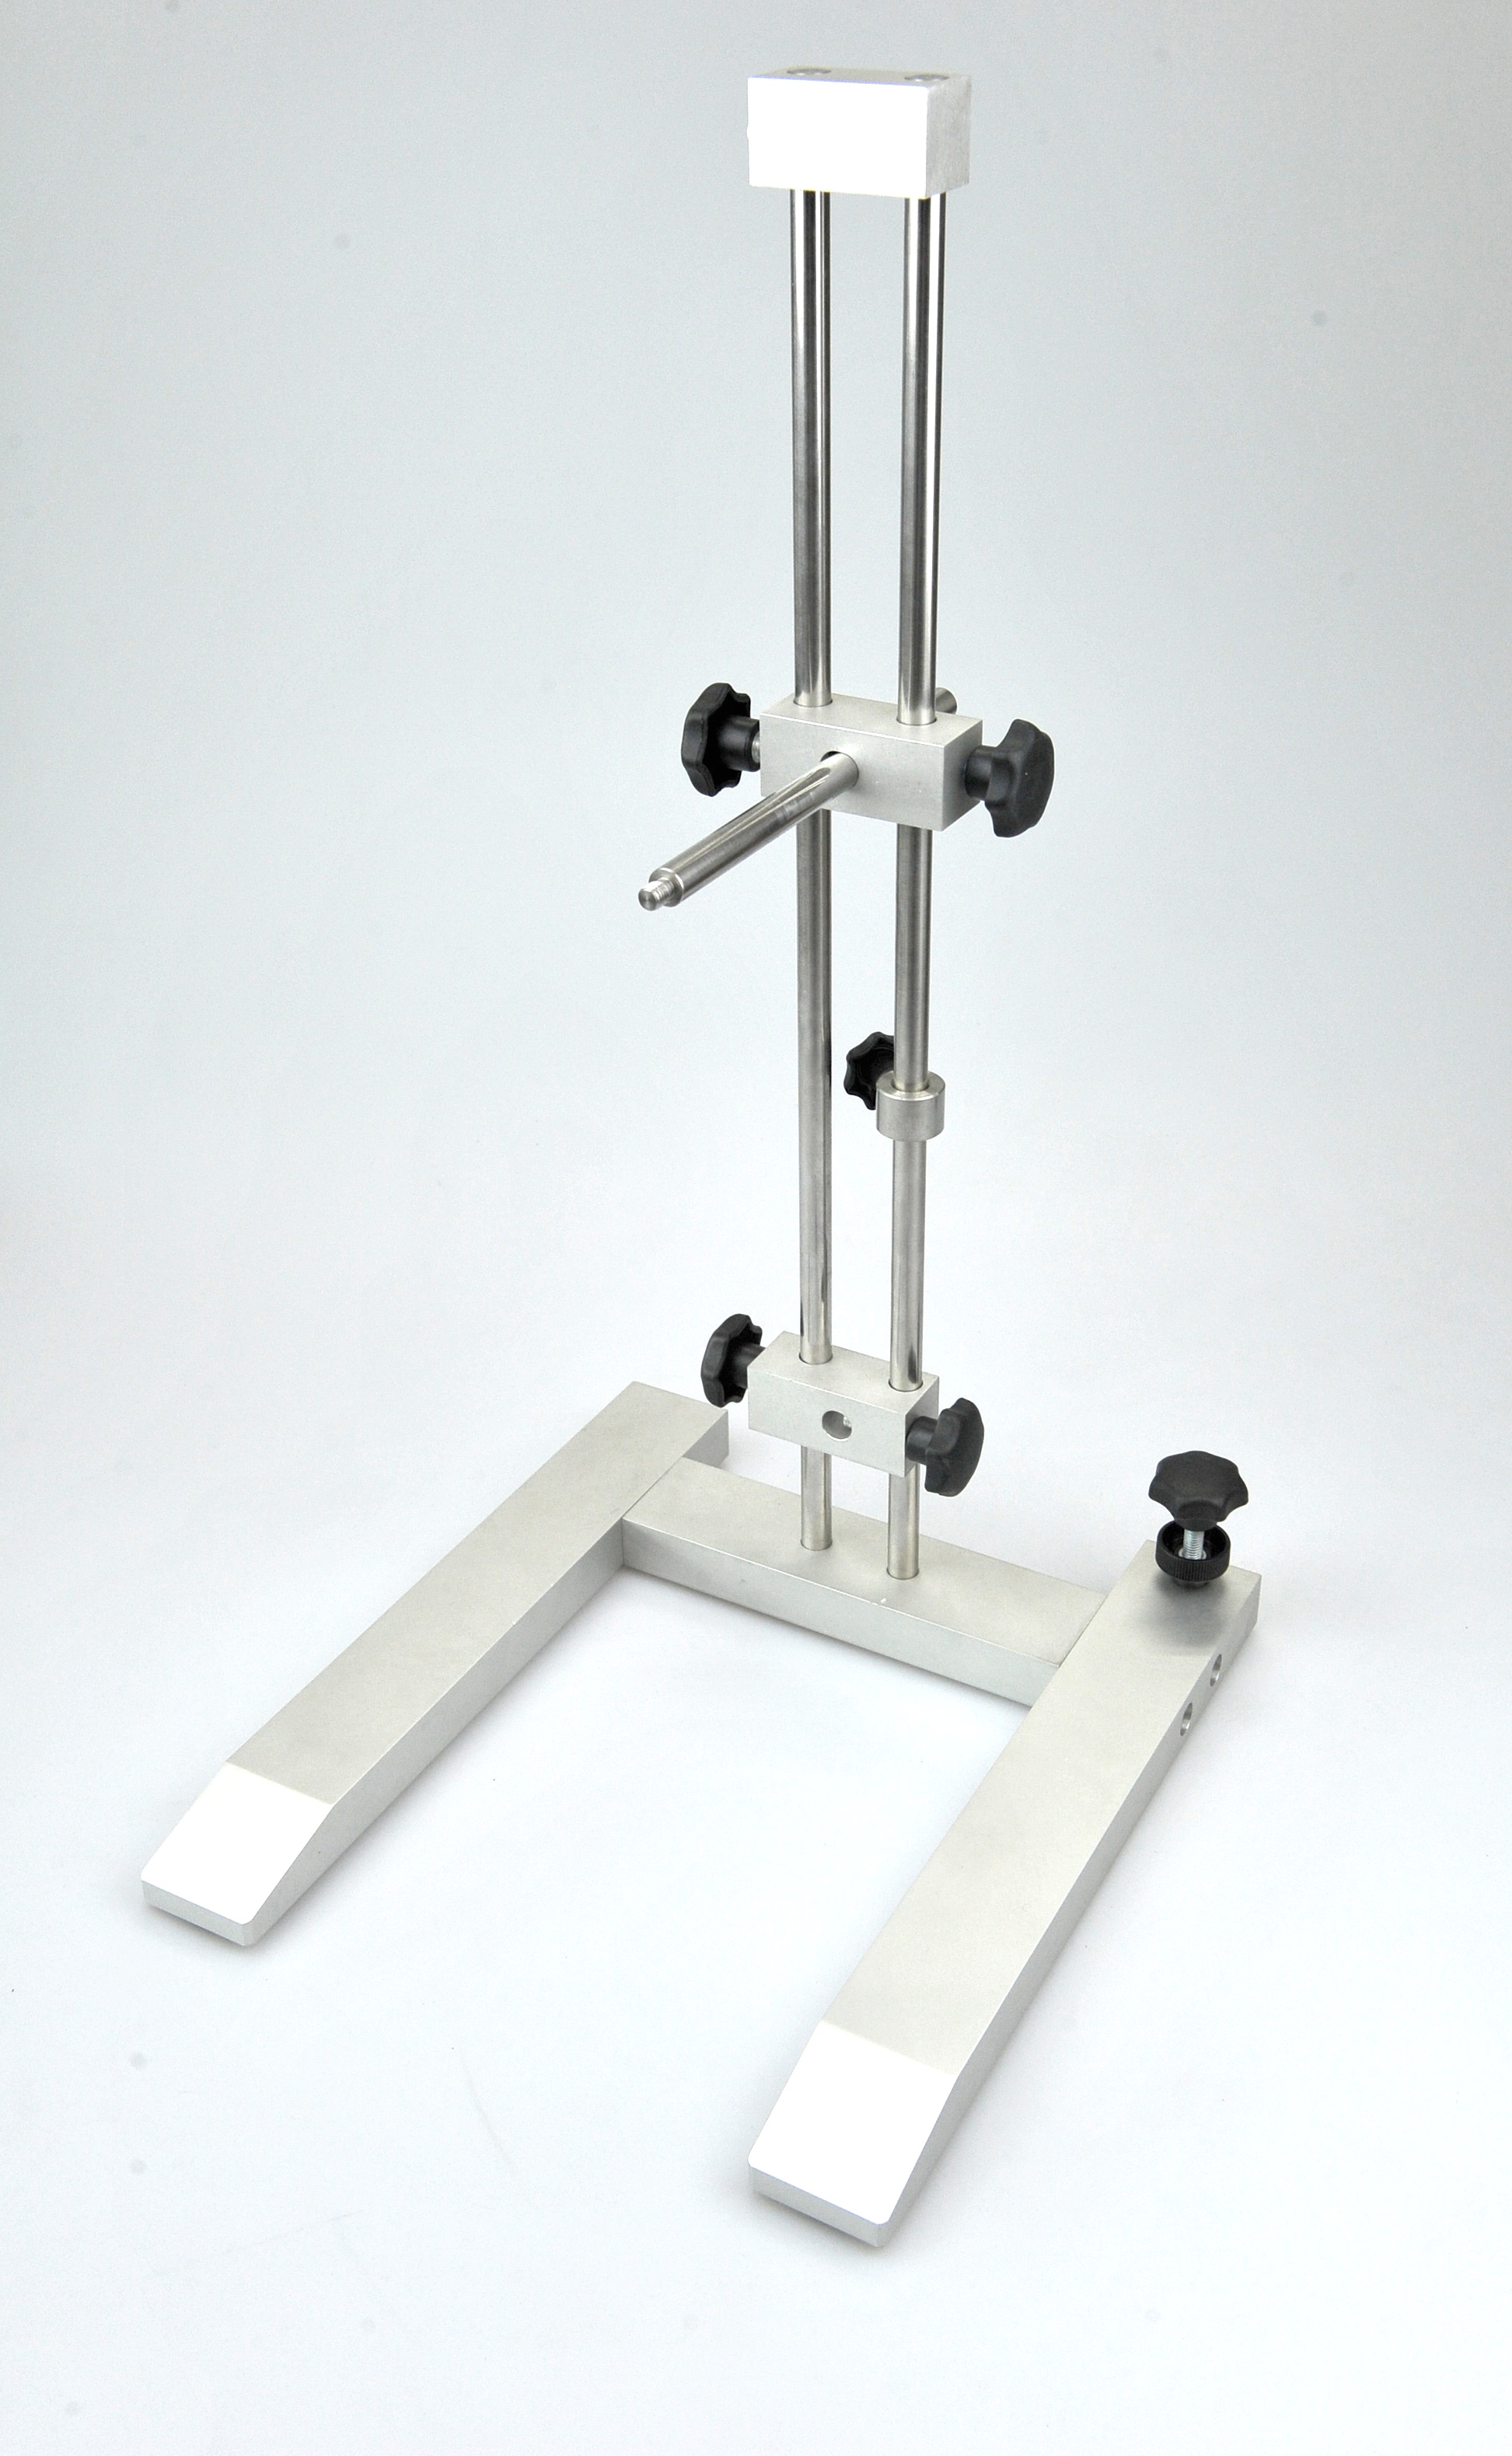 85020401-D500 stand